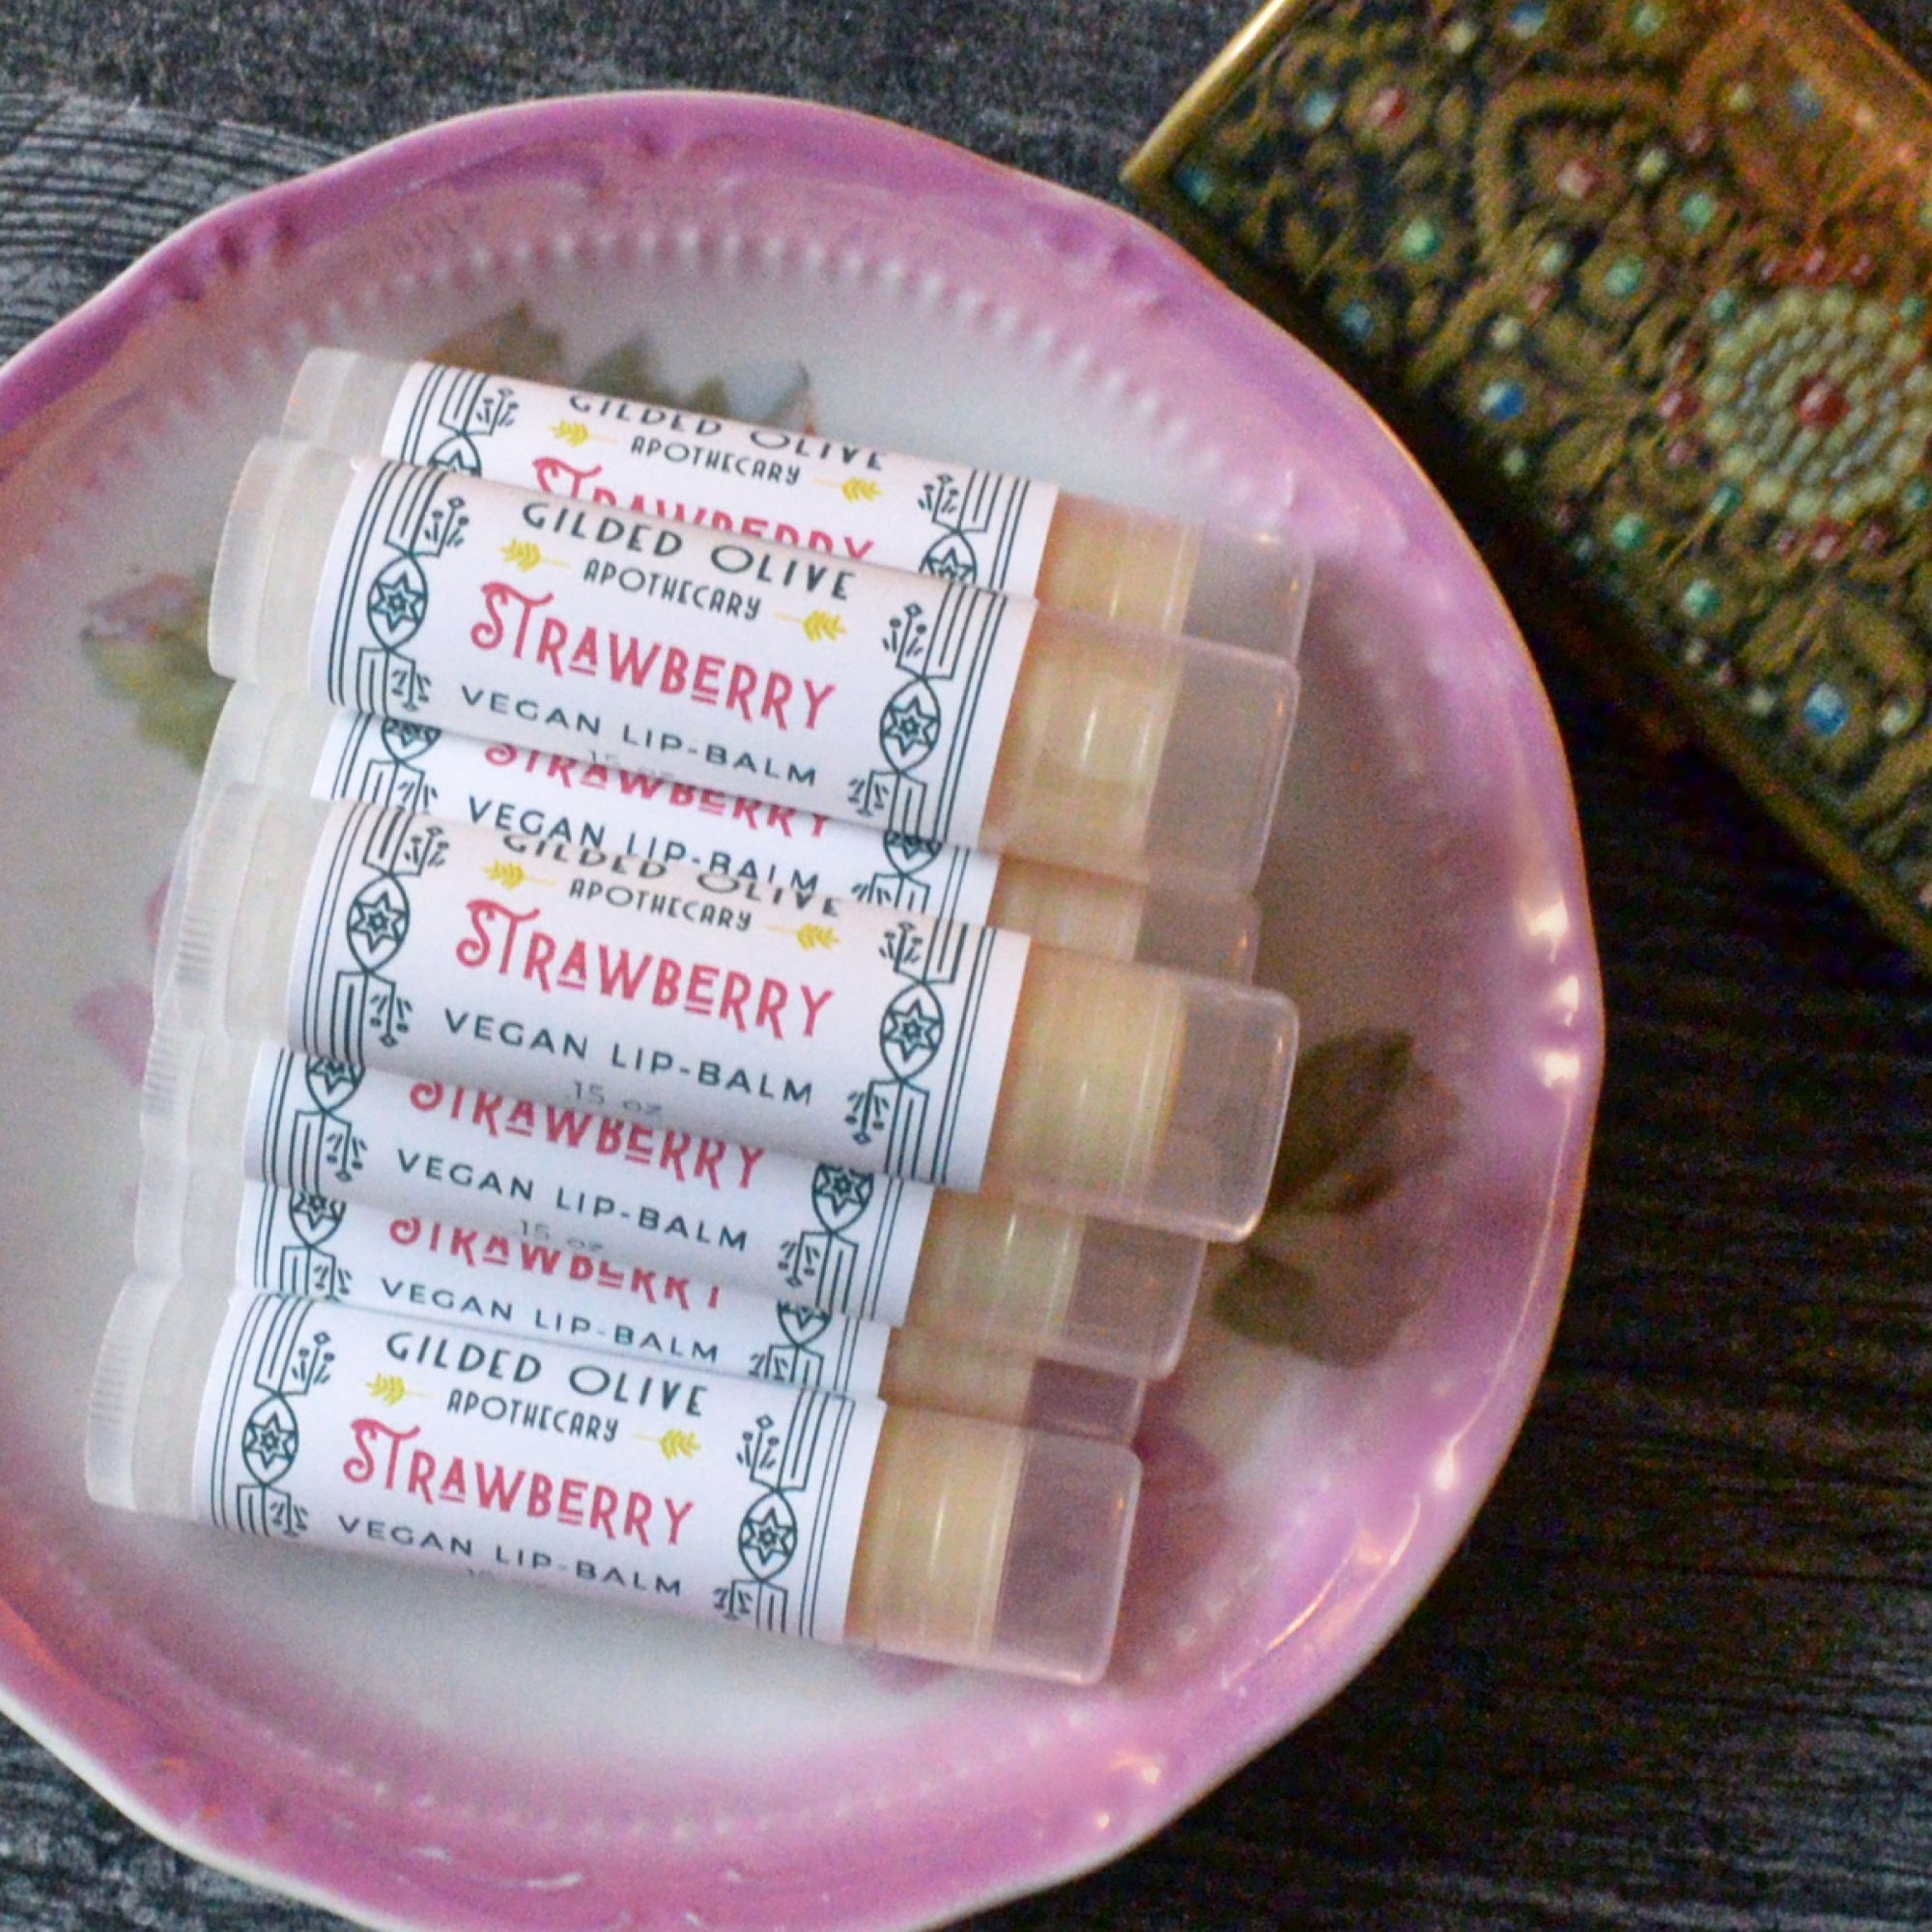 Strawberry Lip Balm | Gilded Olive Apothecary